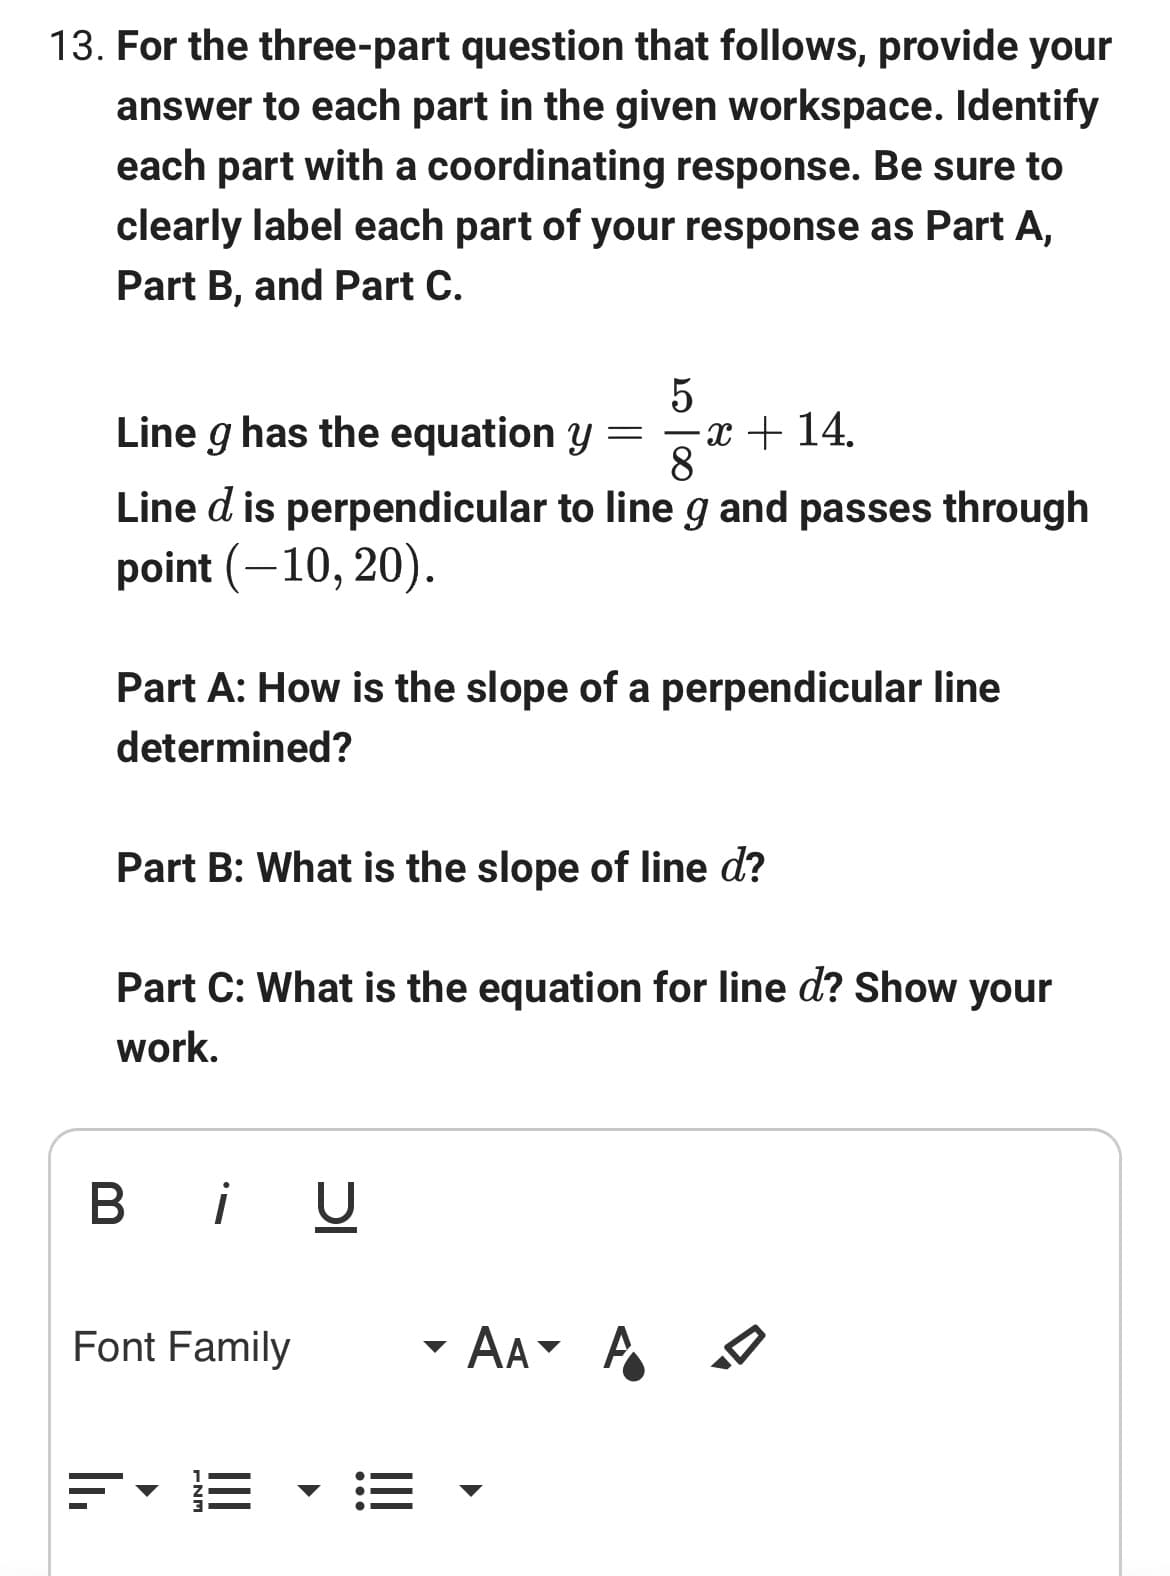 **Question 13: Three-Part Question on Perpendicular Lines**

For the three-part question that follows, provide your answer to each part in the given workspace. Identify each part with a coordinating response. Be sure to clearly label each part of your response as Part A, Part B, and Part C.

Line \( g \) has the equation \( y = \frac{5}{8}x + 14 \).

Line \( d \) is perpendicular to line \( g \) and passes through the point \( (-10, 20) \).

**Part A**: How is the slope of a perpendicular line determined?

**Part B**: What is the slope of line \( d \)?

**Part C**: What is the equation for line \( d \)? Show your work.

[Insert response workspace here, styled similar to the provided text editor interface, featuring options for bold, italics, underline, font family, font size, font color, alignment, bullet points, and more.]